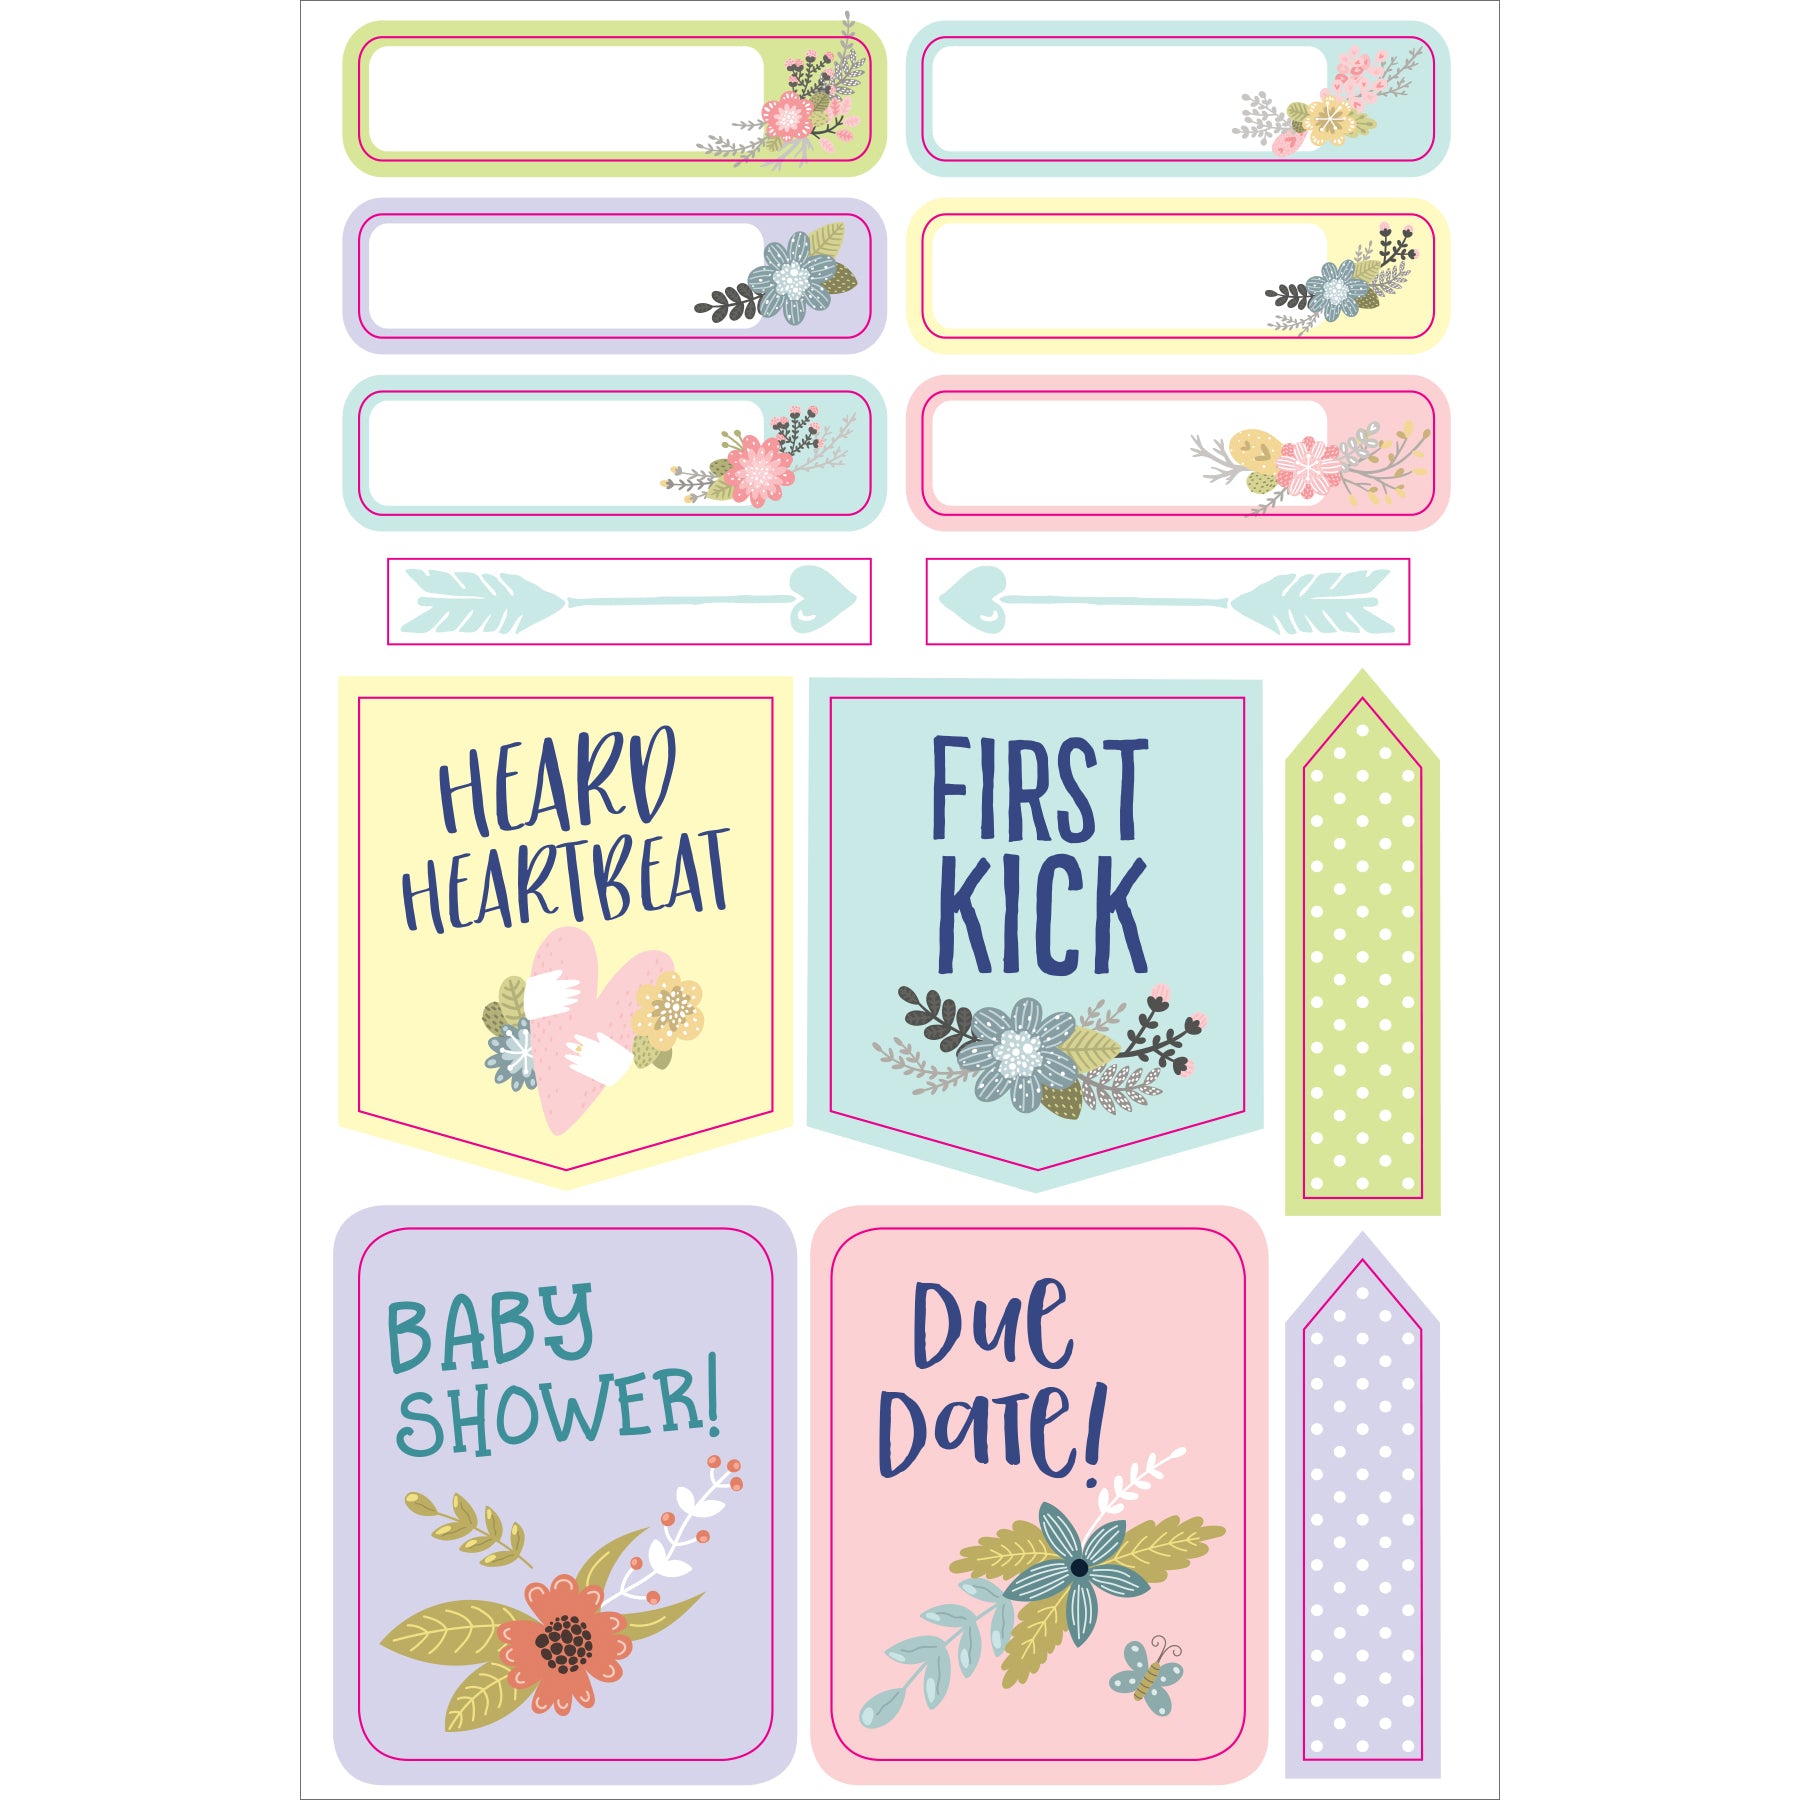 Pregnancy & Baby's 1st-Year Planner Stickers - 12 sheets - Paper Kooka